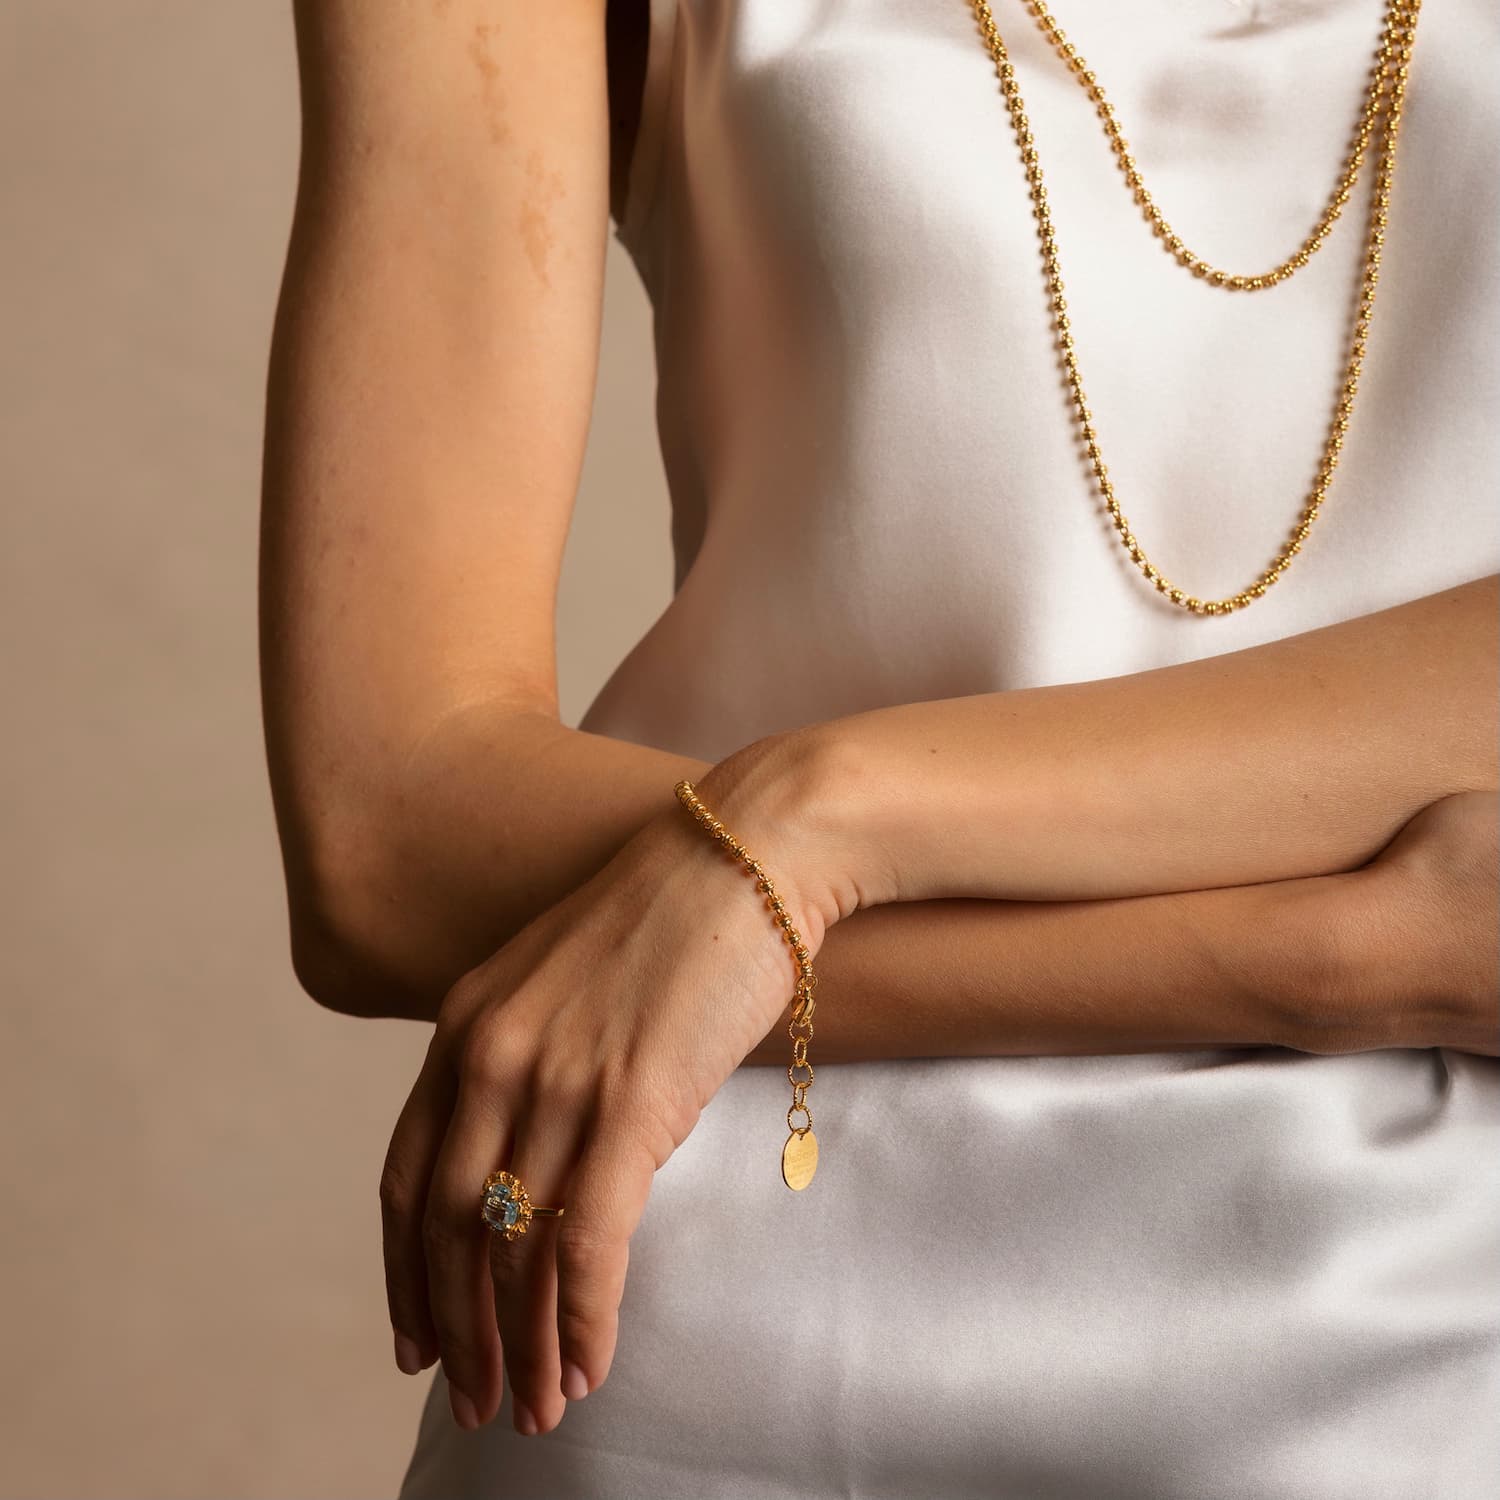 A model wearing a delicate gold chain bracelet with a small circular gold charm and lobster clasp all in 24K yellow gold finish with gold necklaces, earrings, and a ring to match. The jewelry is hand-crafted and designed from the iconic DelBrenna Links collection - Italian jewelry designs hand-crafted in Tuscany.